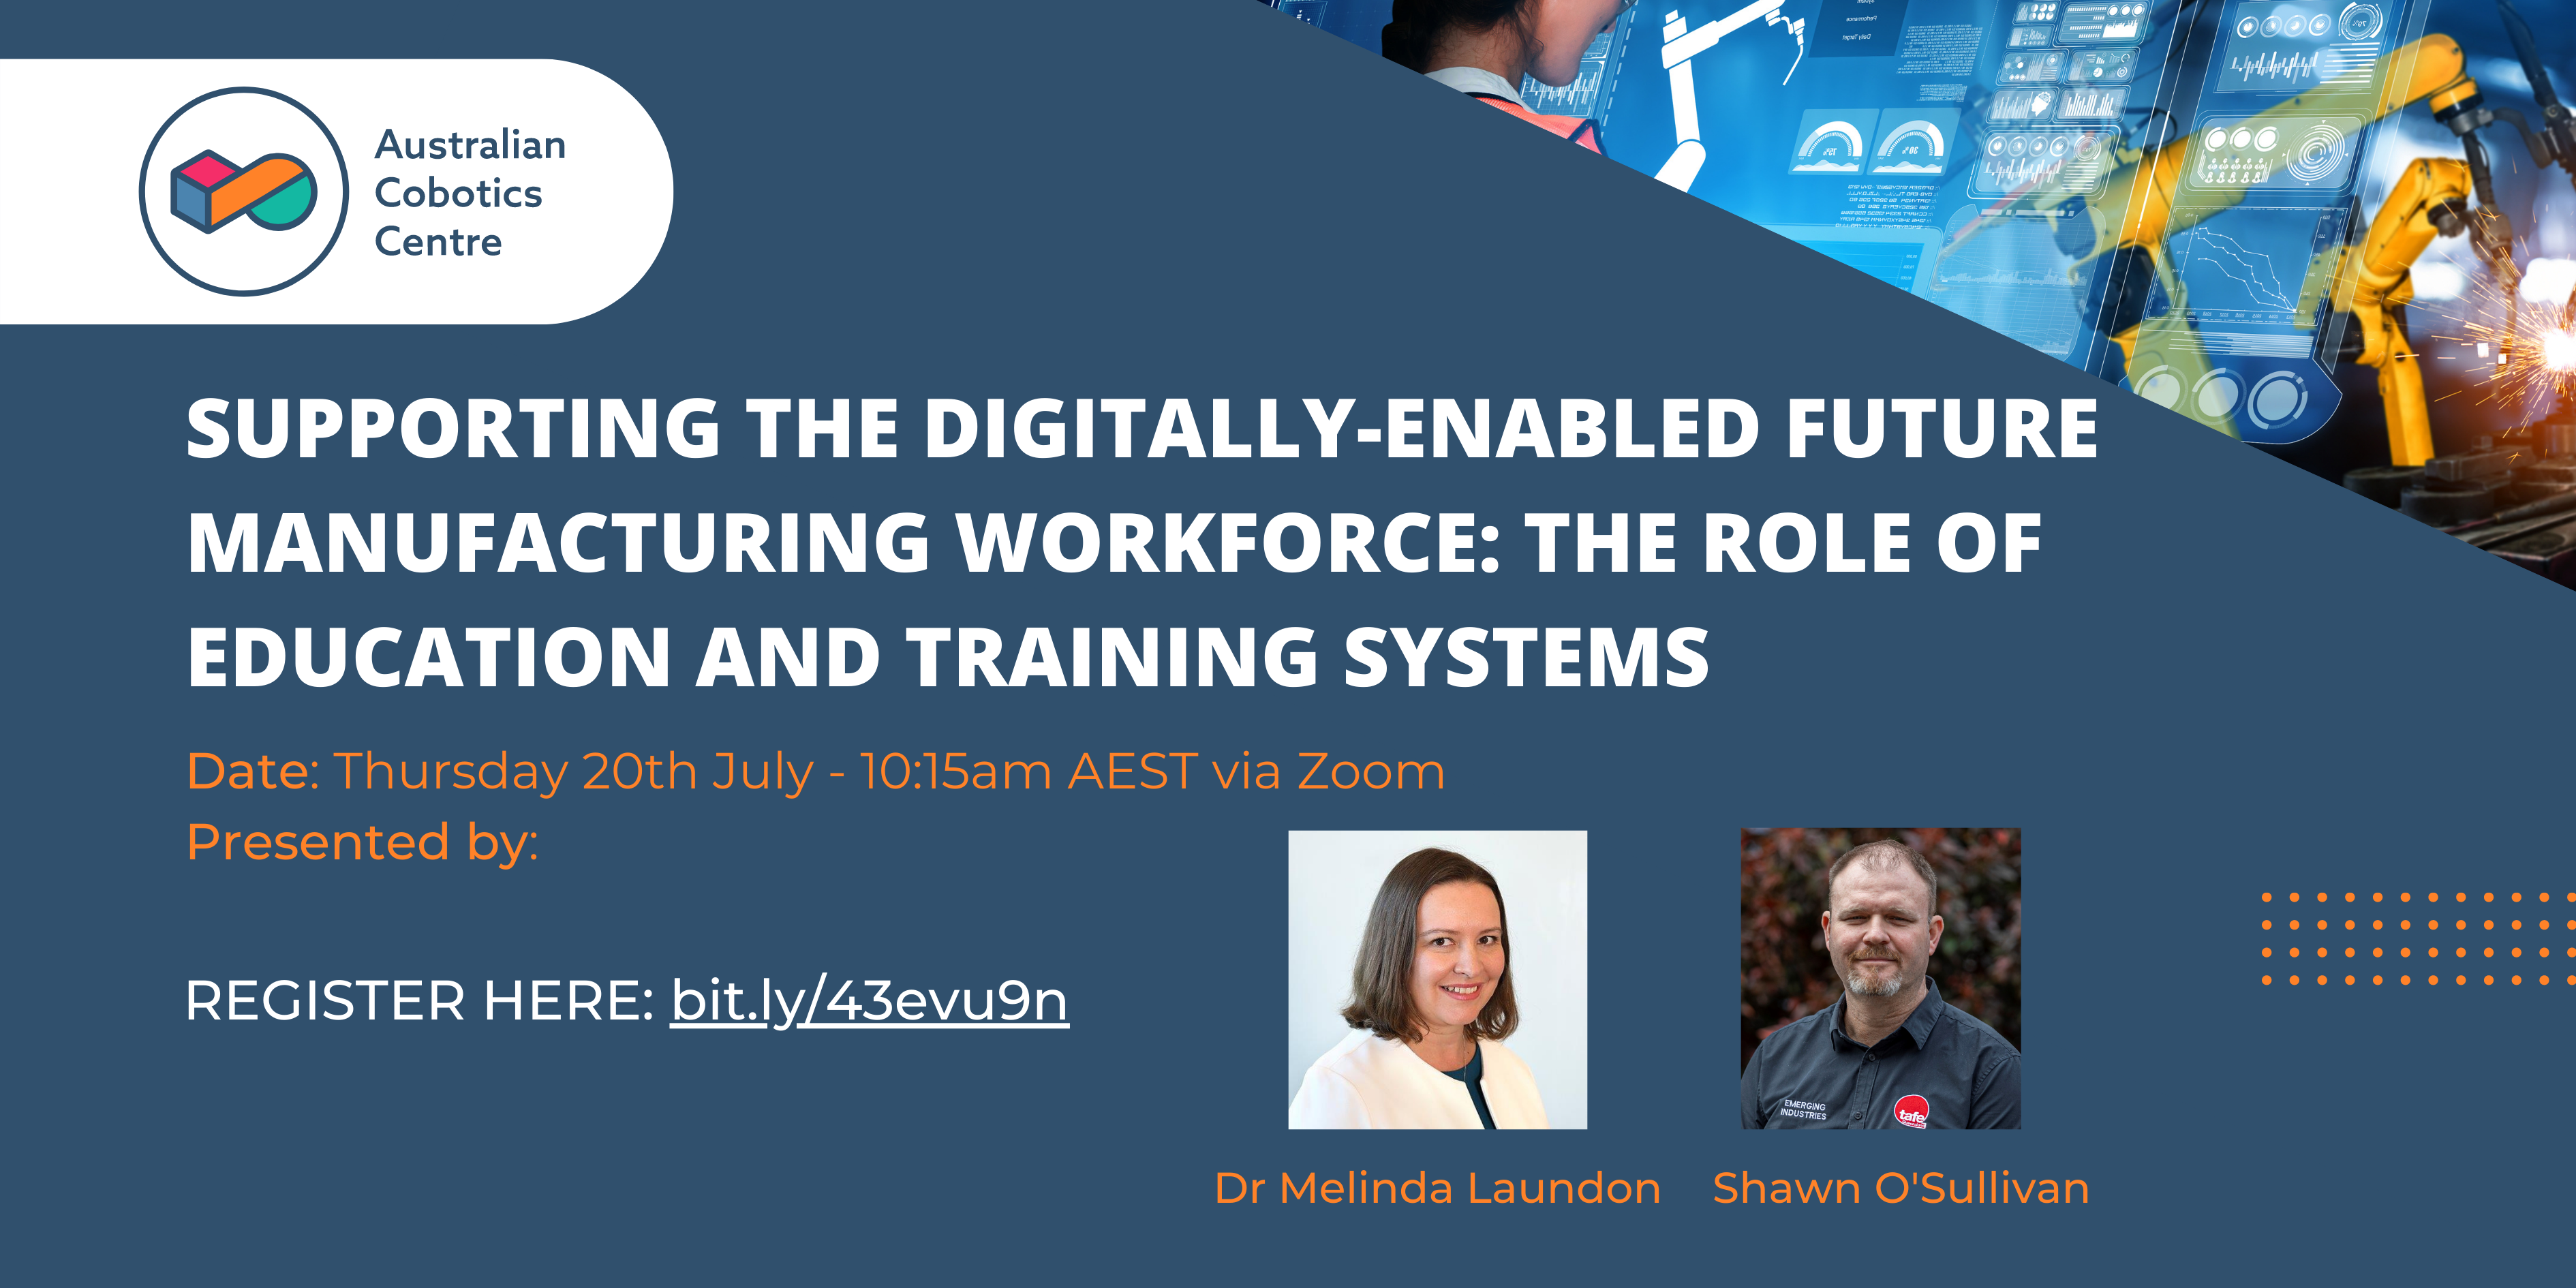 Seminar Series: Supporting the digitally-enabled future manufacturing workforce: the role of education and training systems